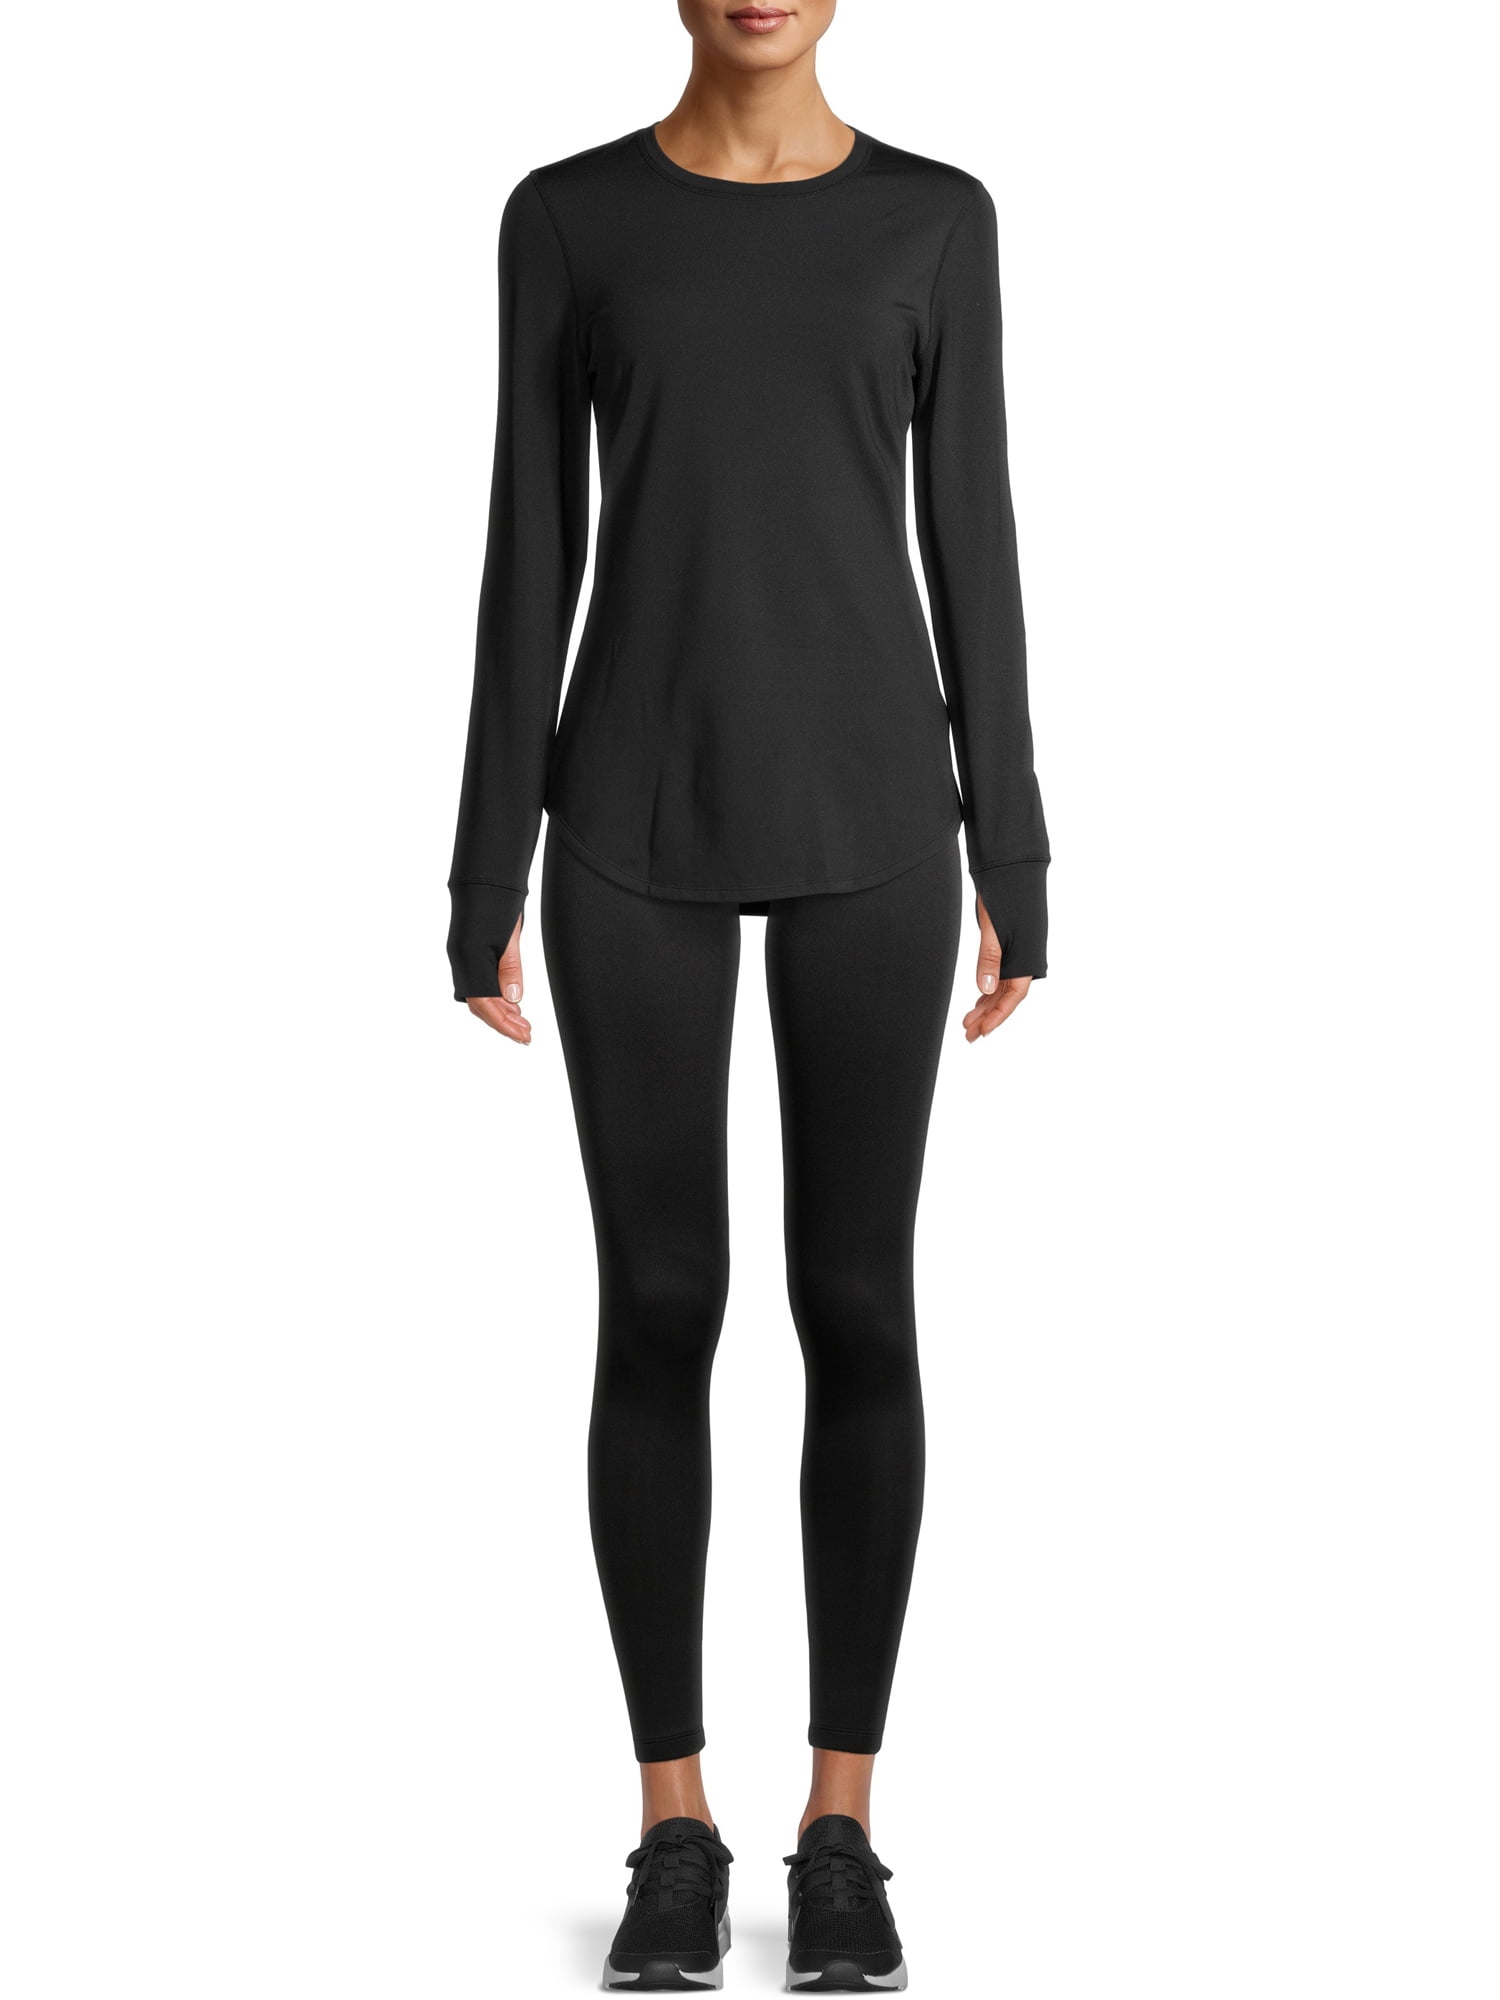 ClimateRight by Cuddl Duds Women's Thermal Guard Crew Neck Top & Legging  Base Layer Set, Sizes XS to 4X 